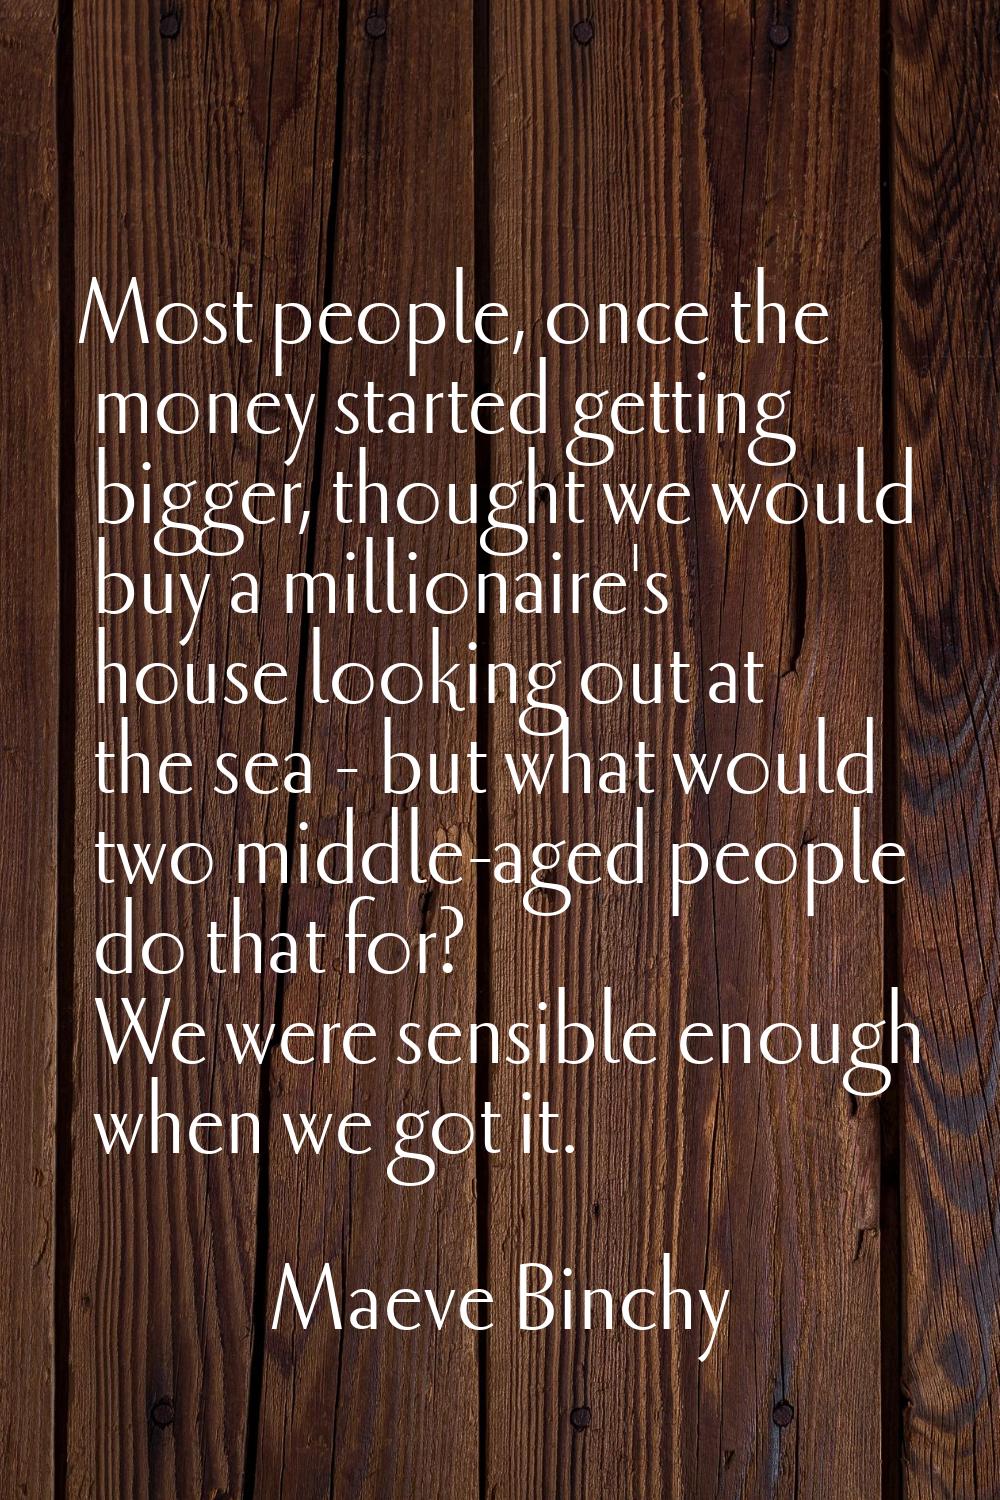 Most people, once the money started getting bigger, thought we would buy a millionaire's house look